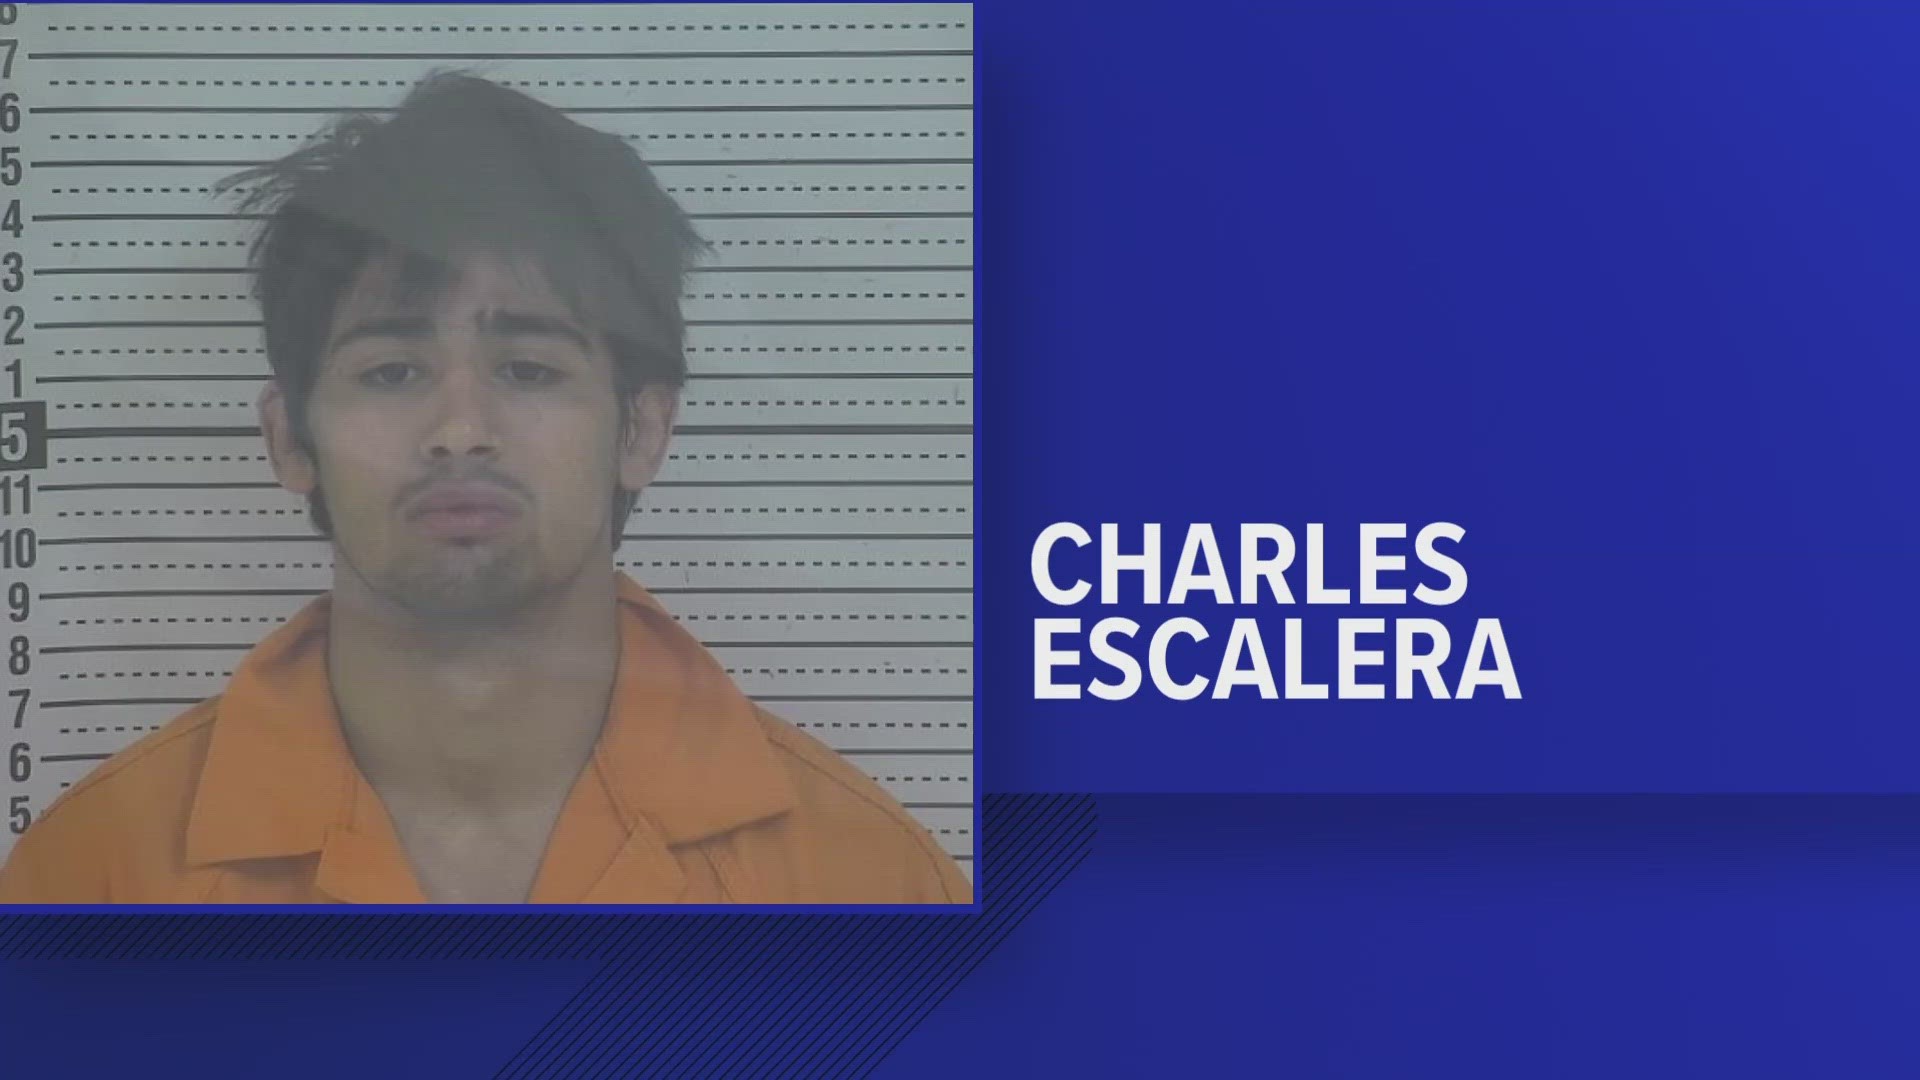 University officials confirmed the arrest of 21-year-old Charles Escalera Saturday evening, hours after an 18-year-old was found unresponsive in their dorm room.